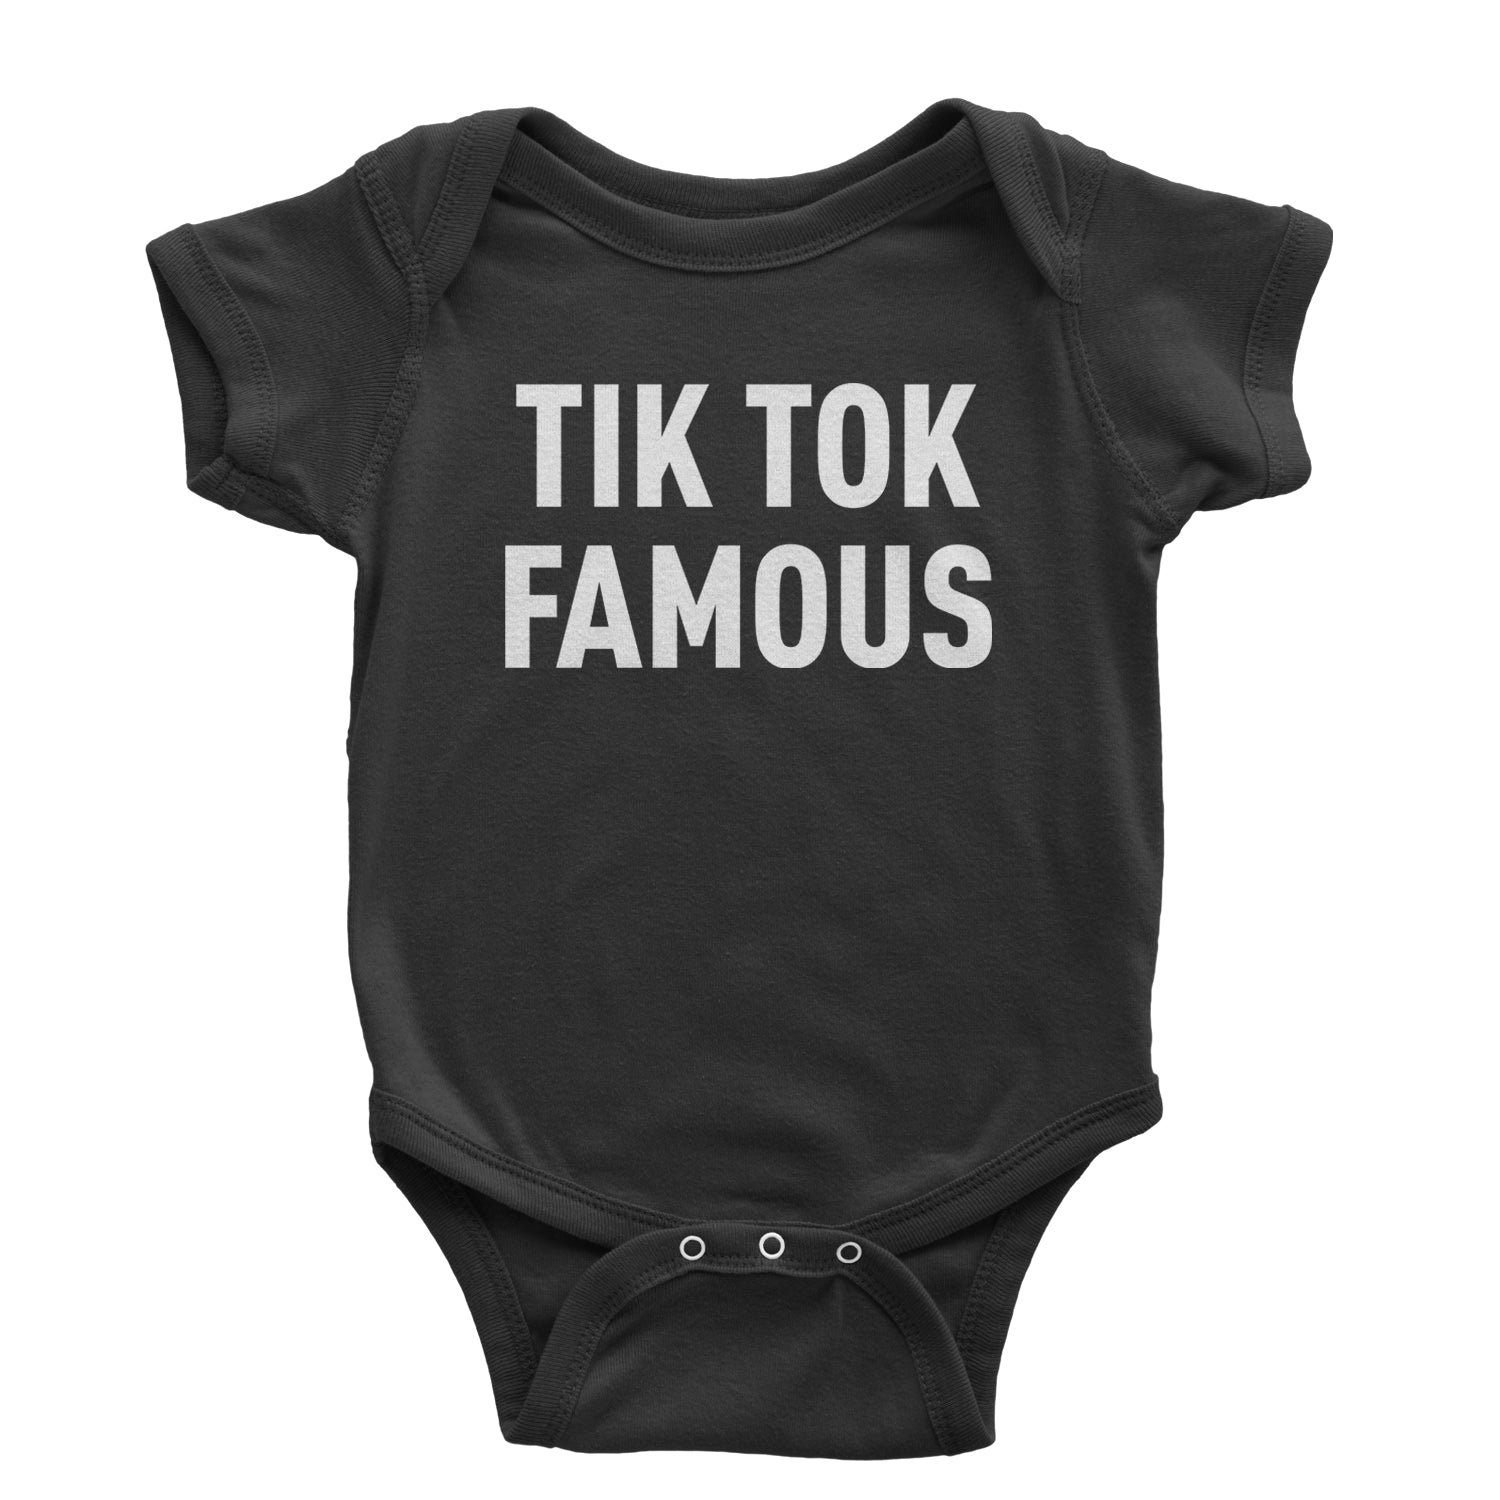 Tik Tok Famous Influencer Promoter Infant One-Piece Romper Bodysuit and Toddler T-shirt